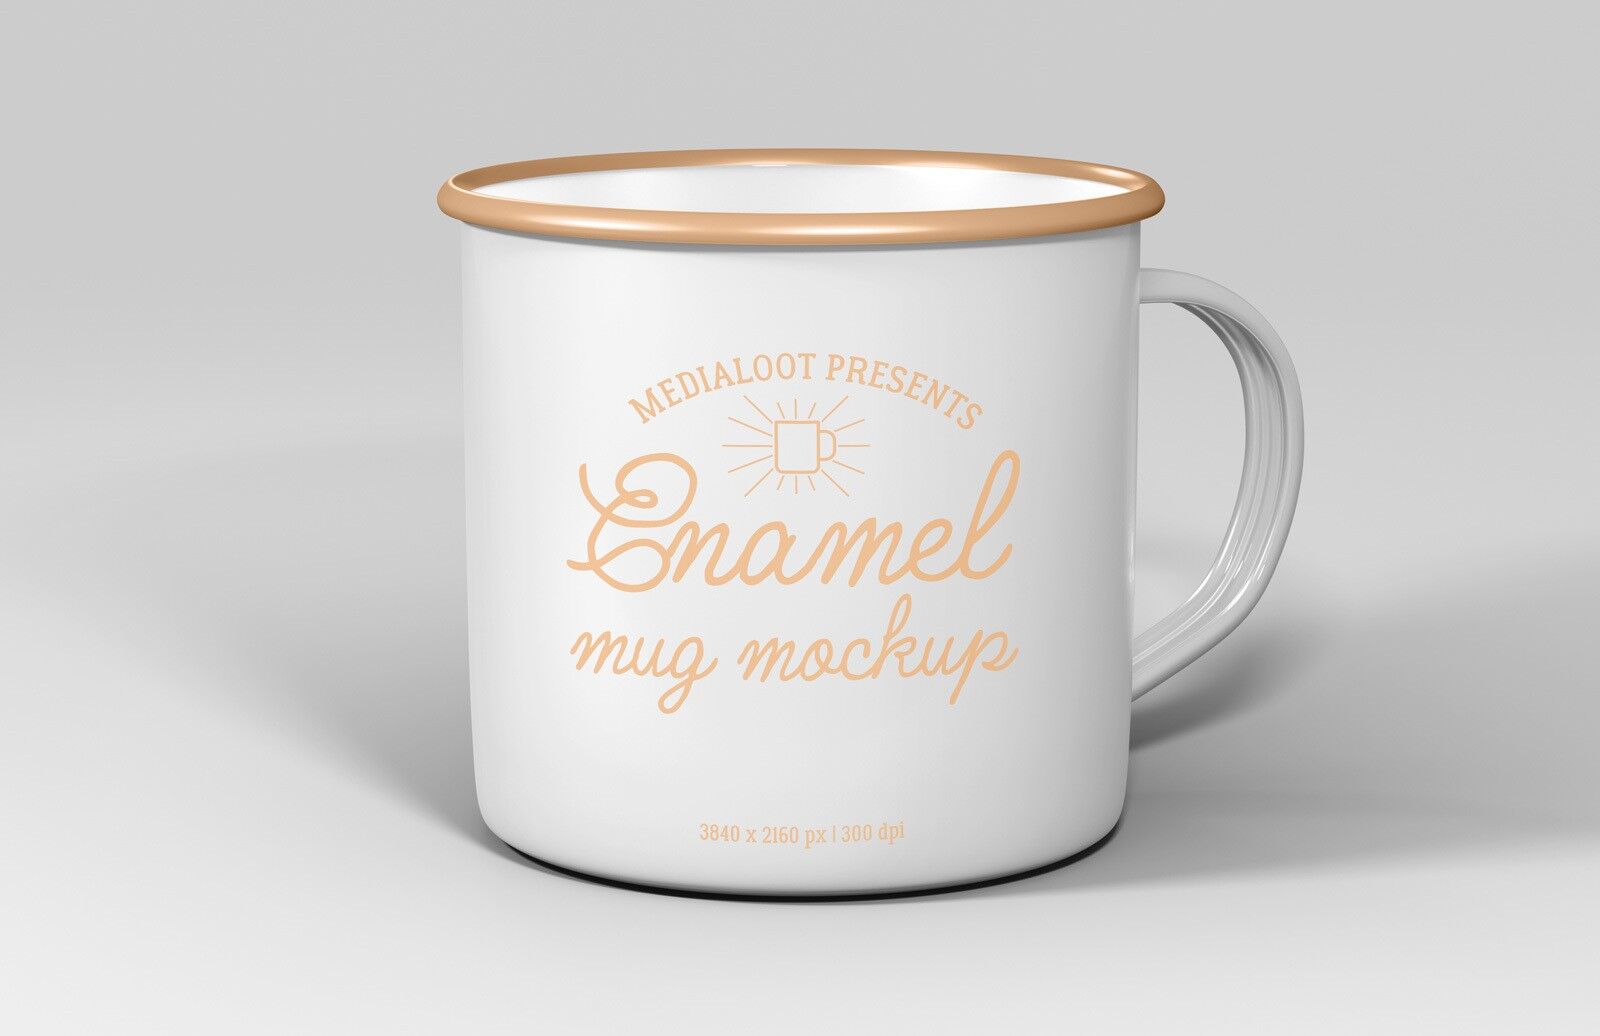 3 Enamelware Mug Mockups with Bottom and Front view FREE PSD